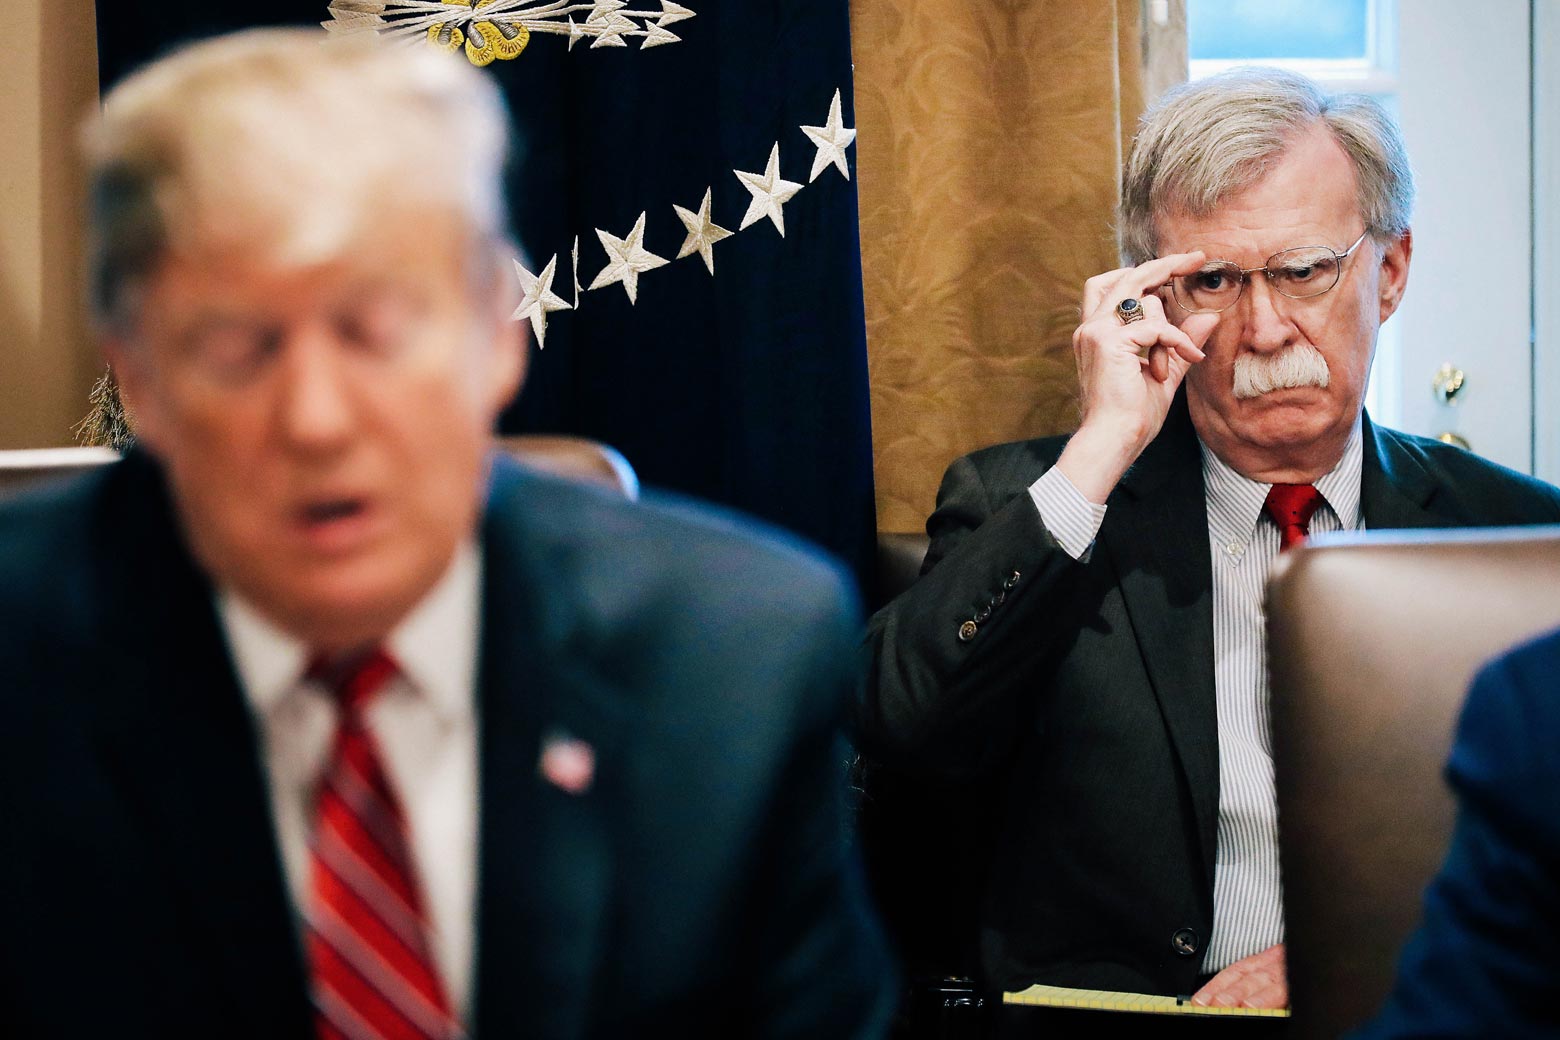 John Bolton, sitting in off to the side and behind Donald Trump, adjusts his glasses as Trump speaks.